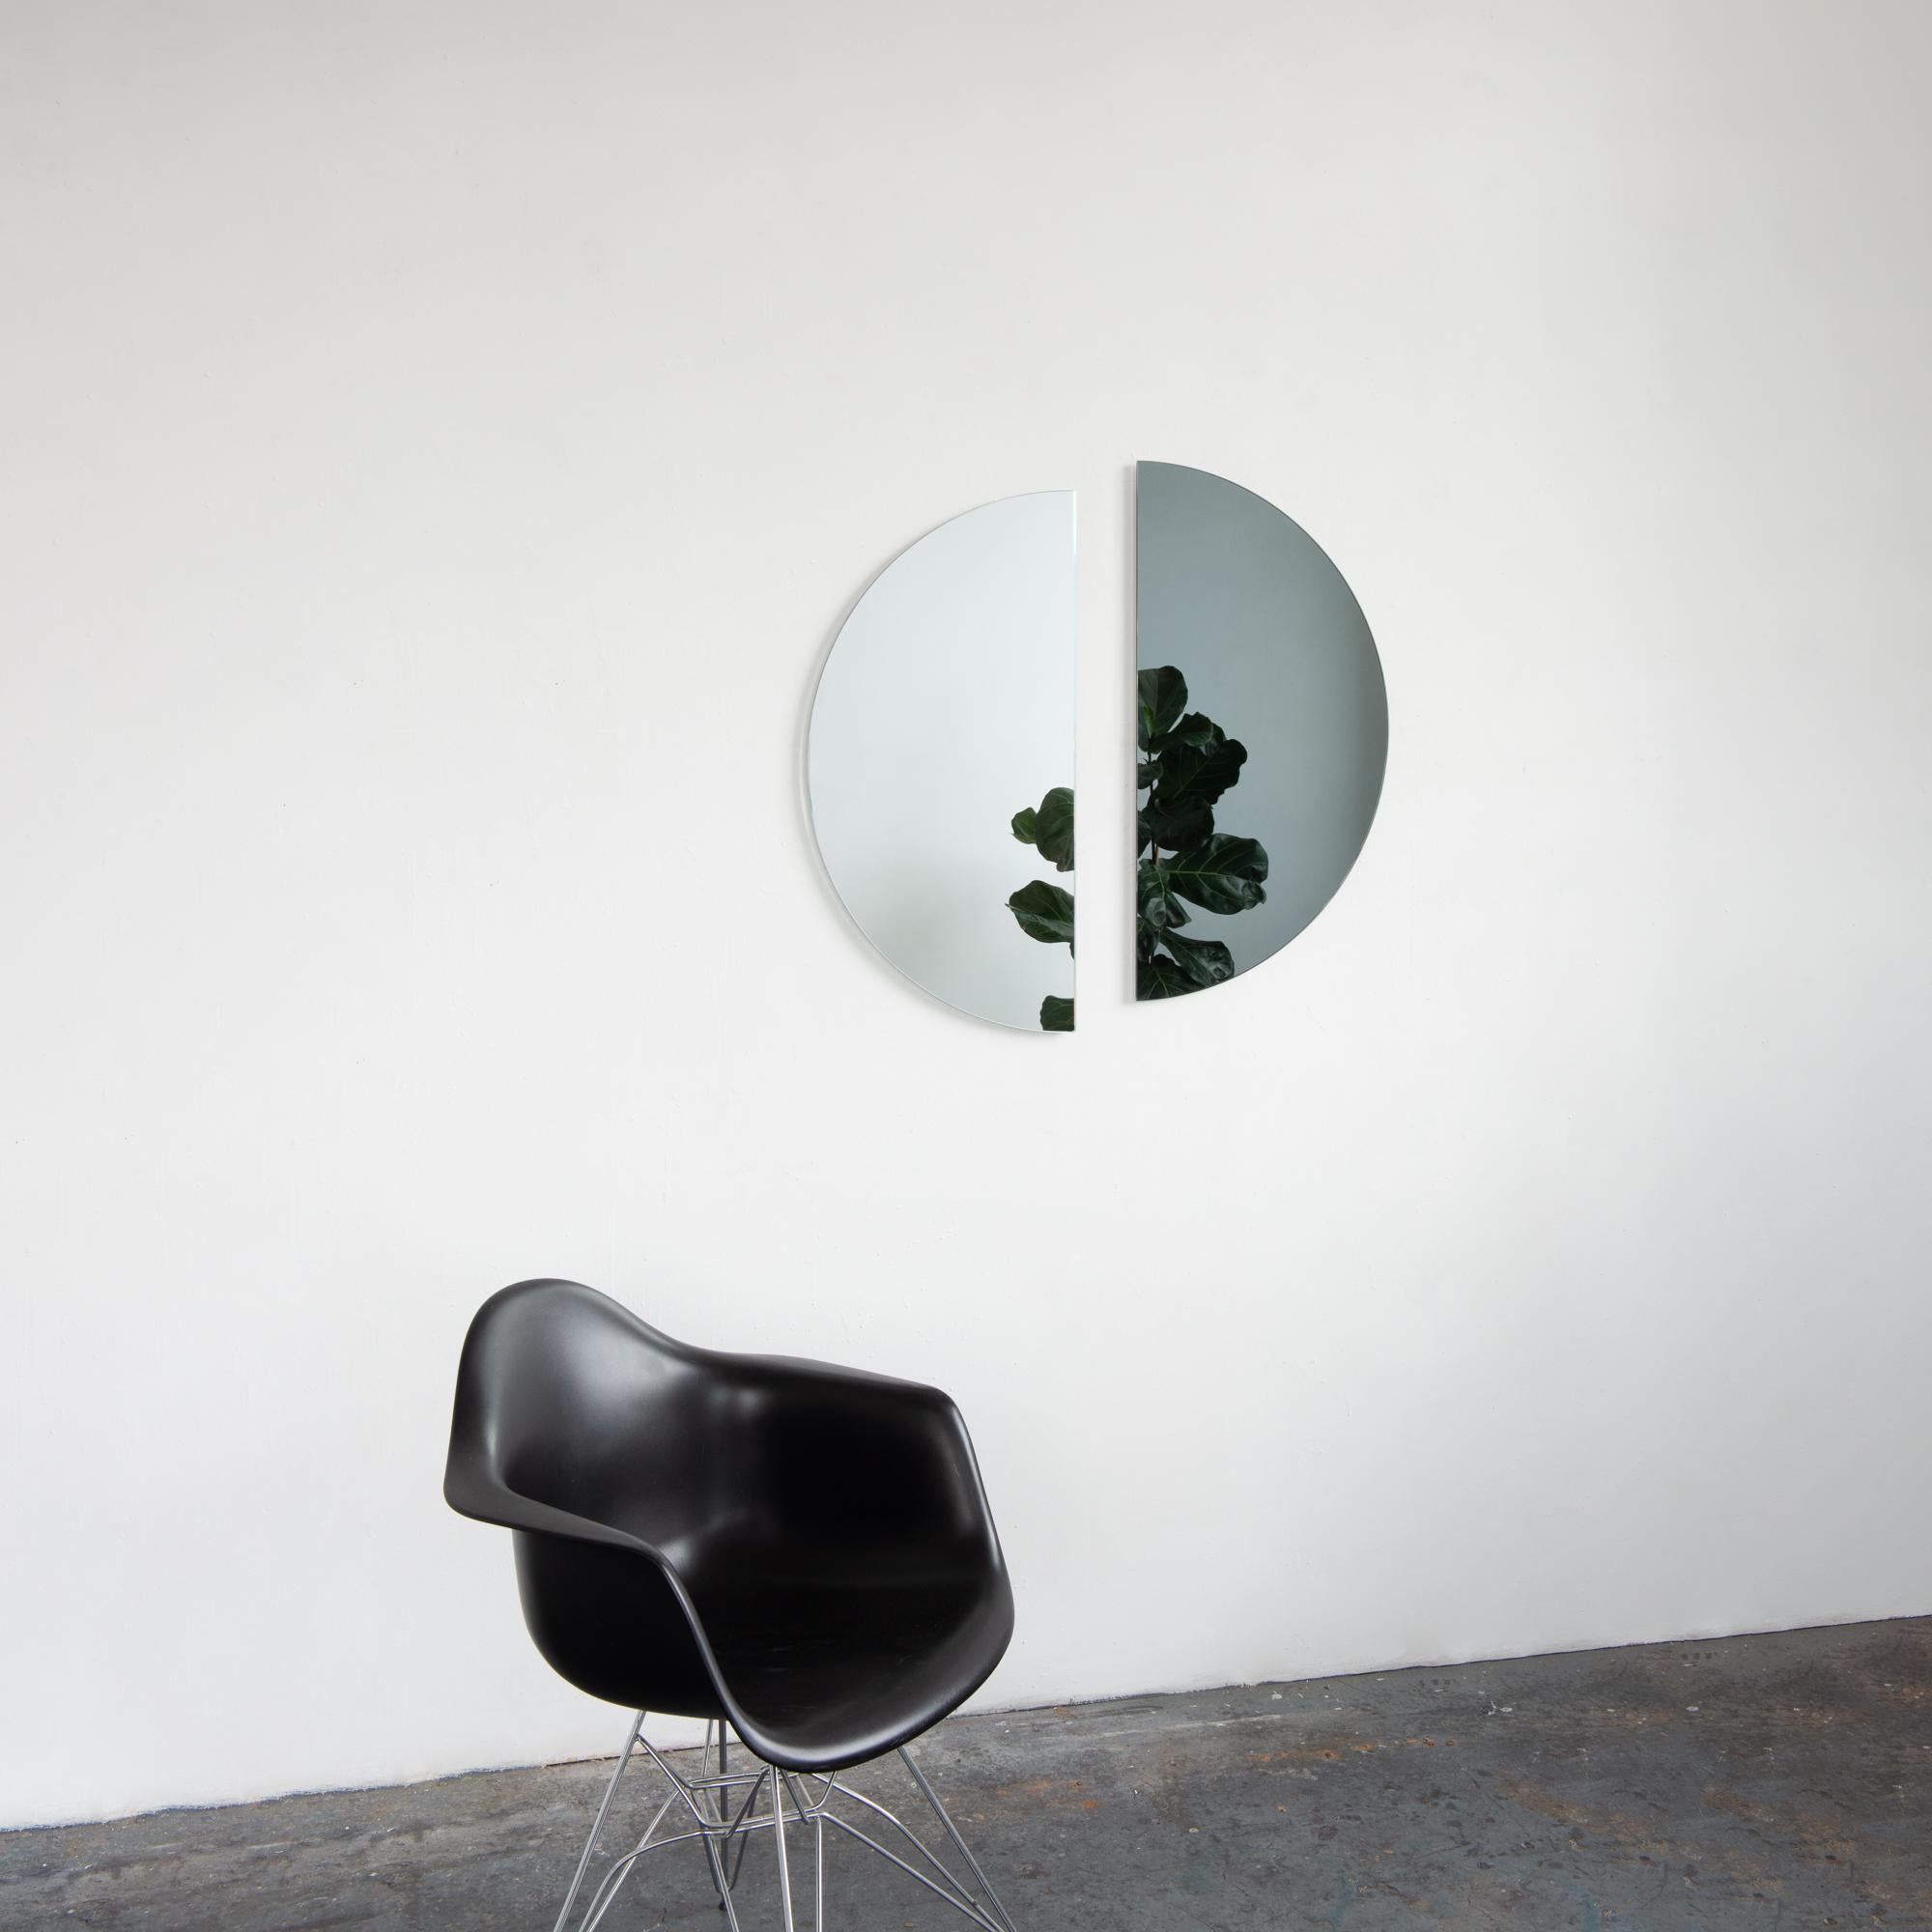 round mirrors for sale